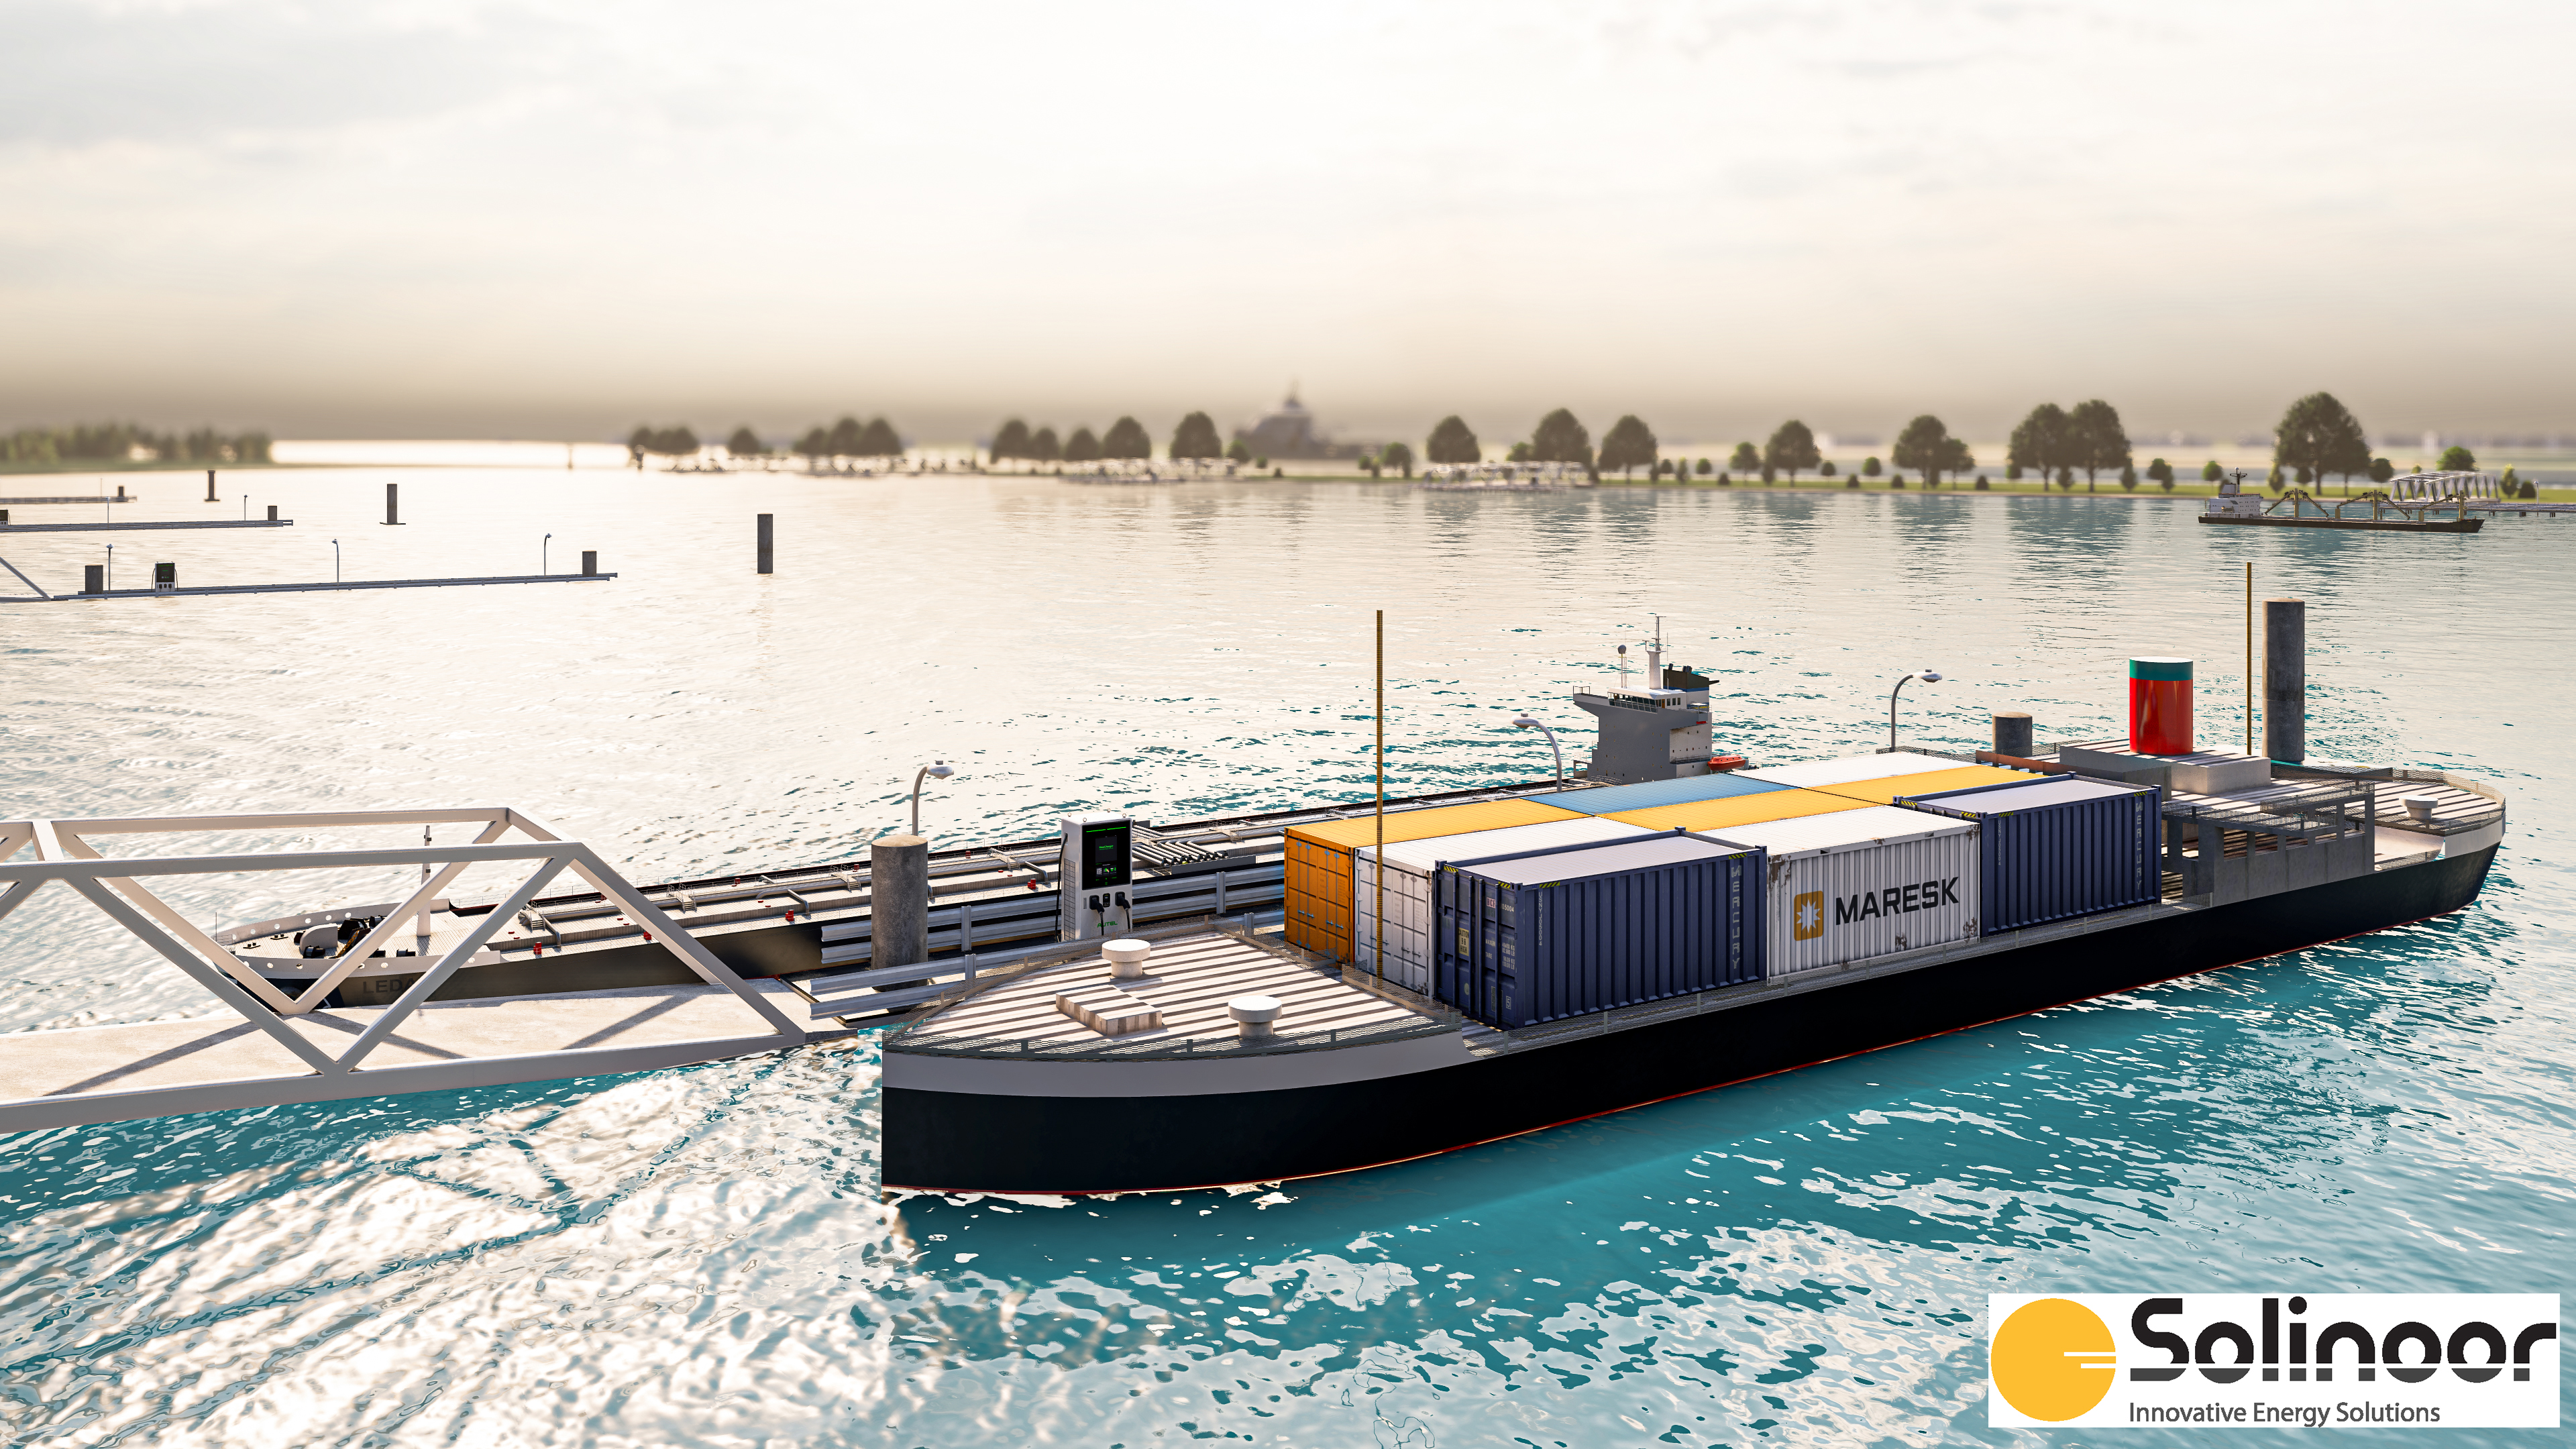 Shore power for ships | Solinoor Innovative Energy Solutions